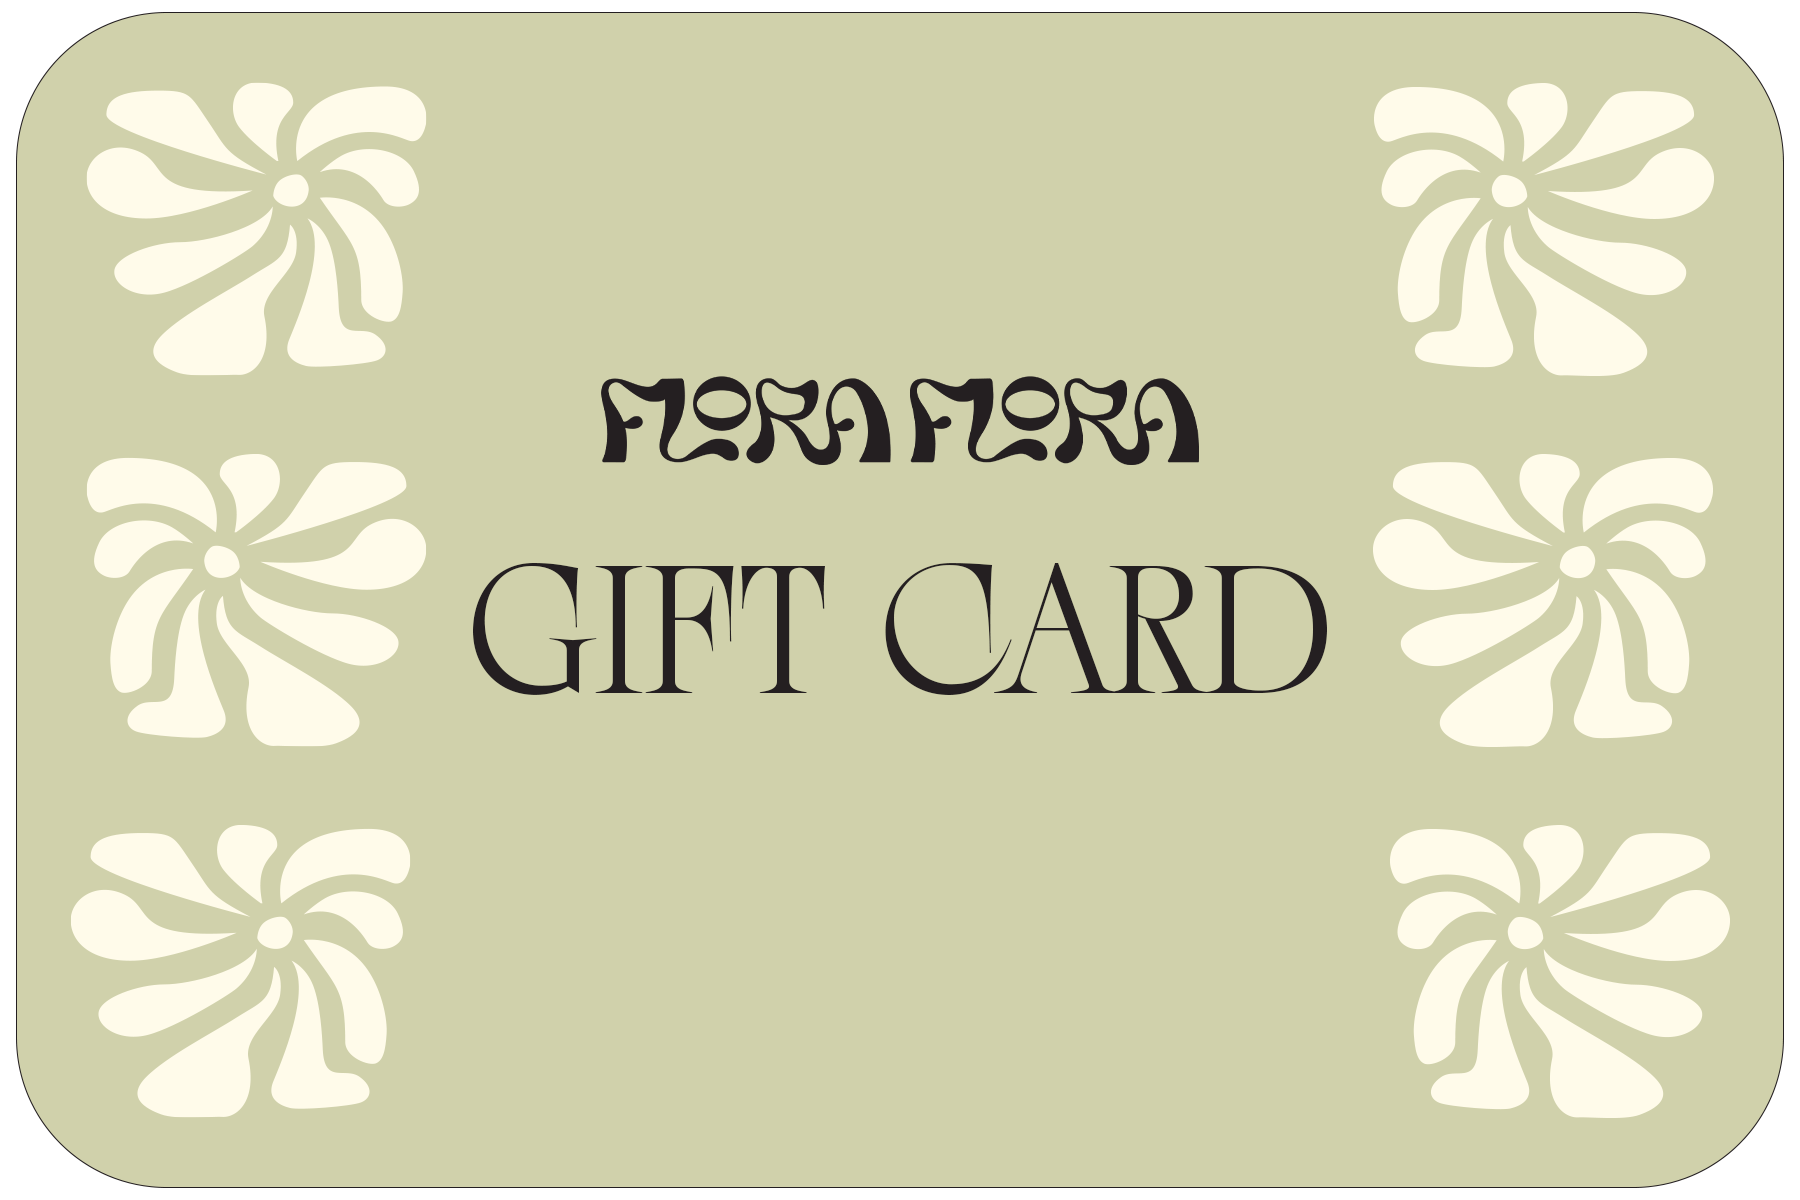 Flora Flora Co Gift Card - Flora Flora Co | Sustainable Botanical Hair Care